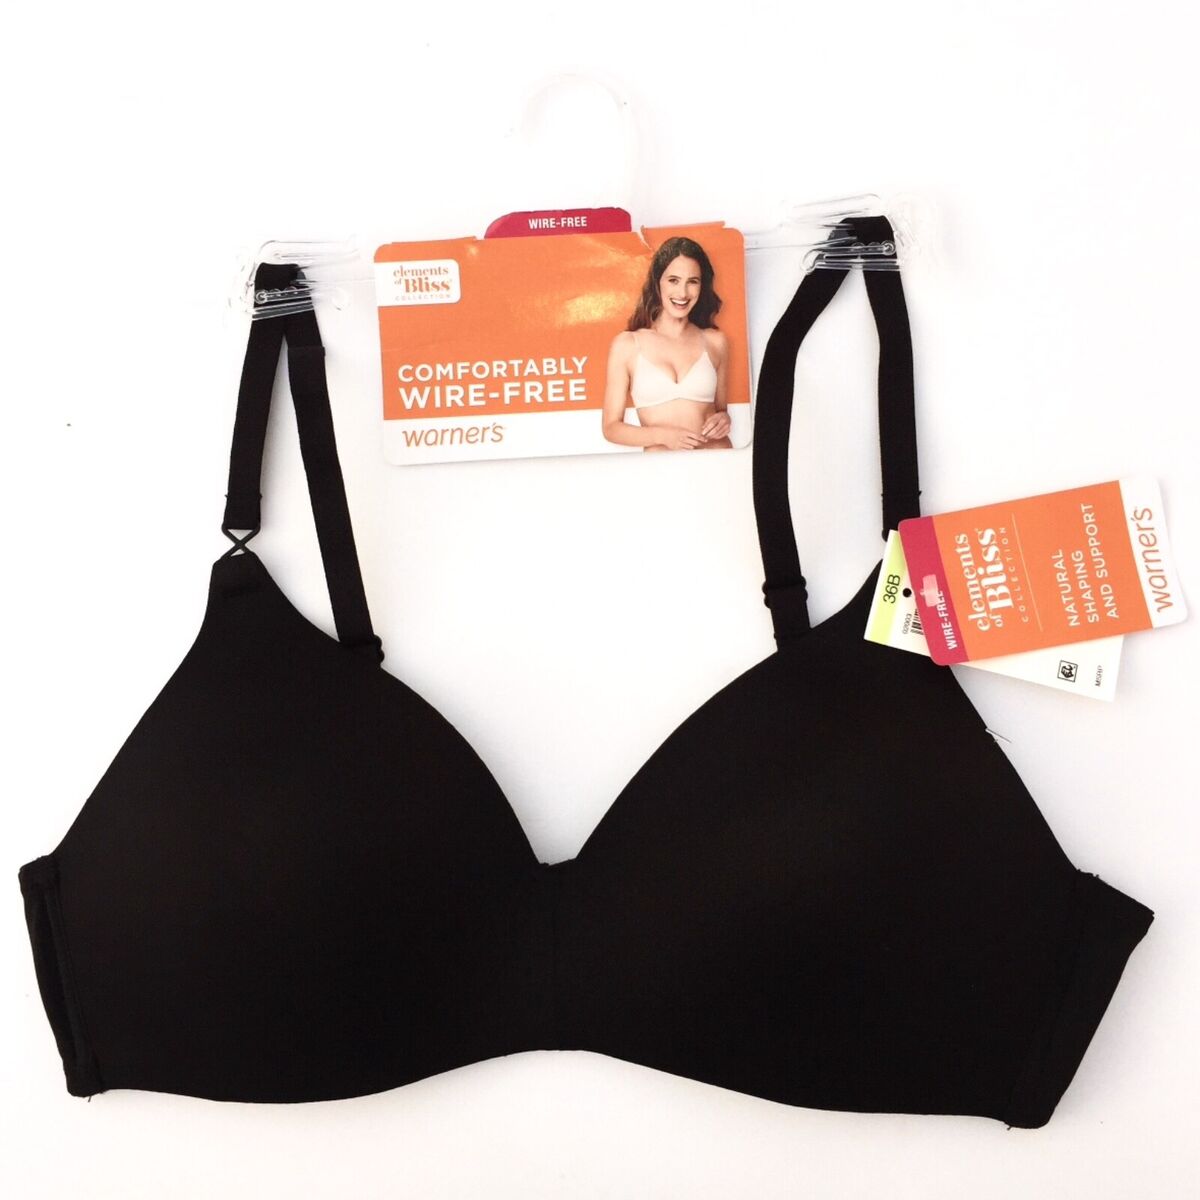 Warner's Elements of Bliss Wire-Free Contour Bra 2003